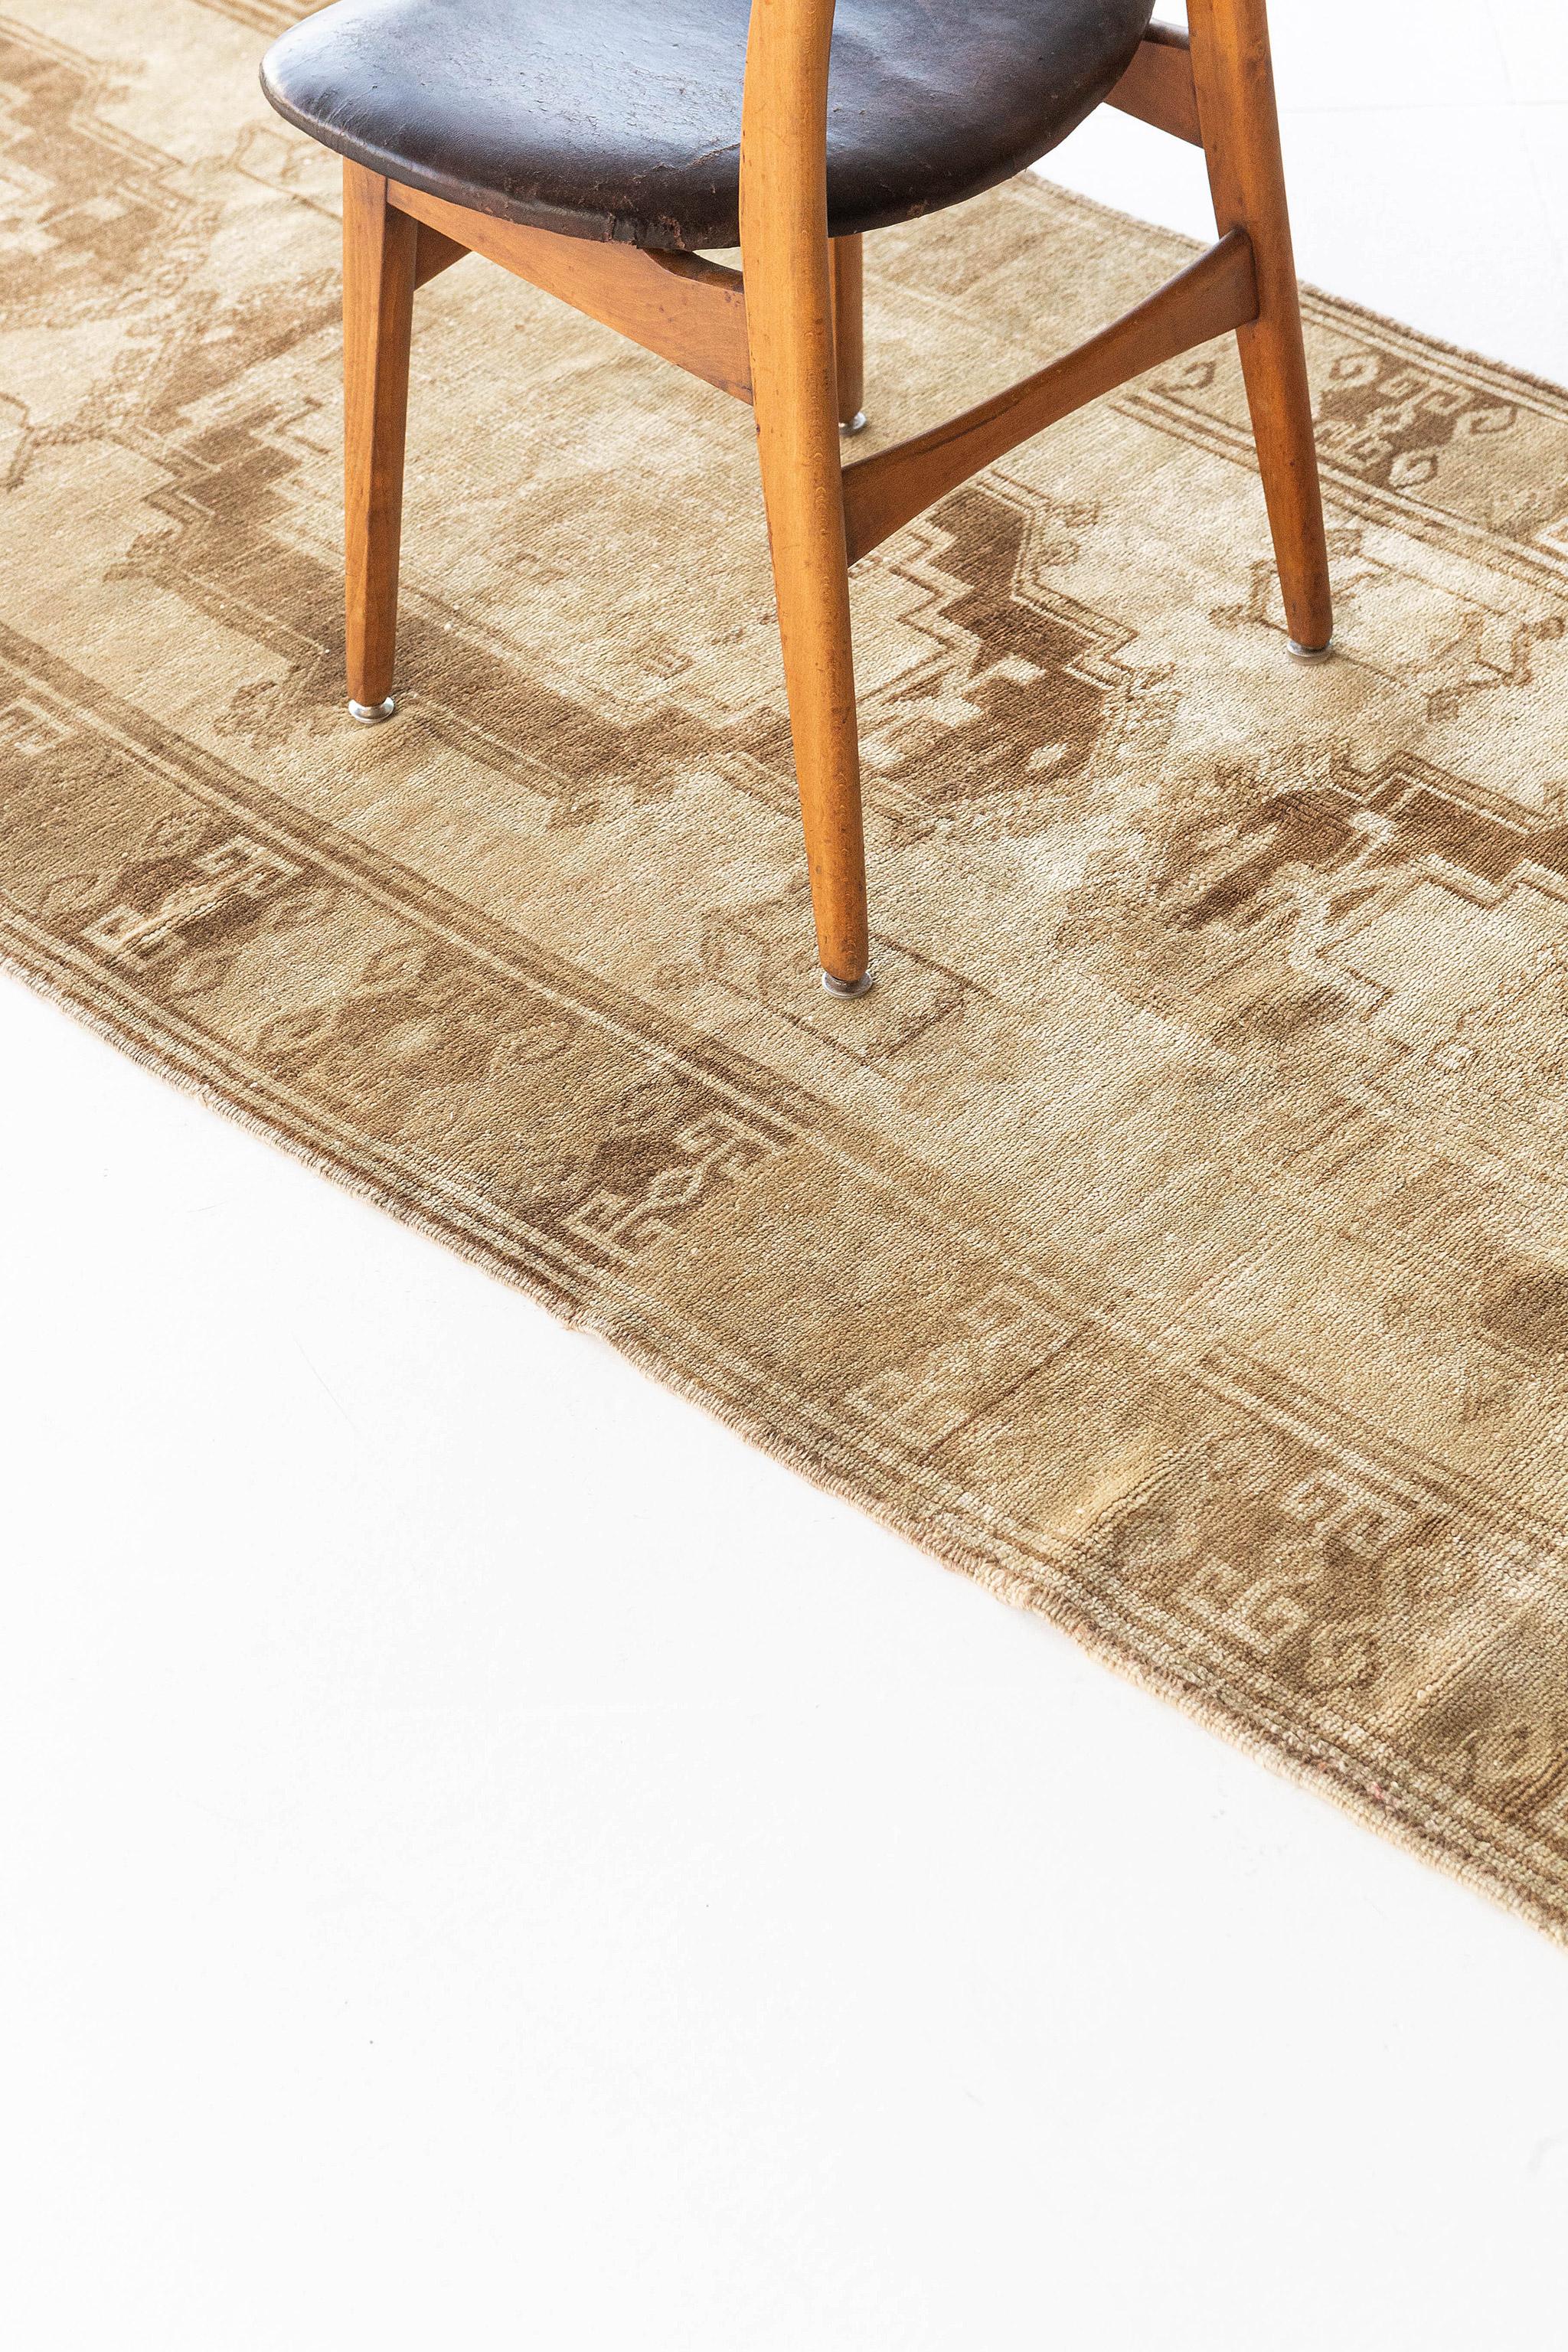 This Vintage Turkish Anatolian Runner features three distinctive lozenge cusped medallions composed of blossoms and geometric formations collaborating rhythmically. A stylized Ram’s horn meander border create a frame for this work of art. This